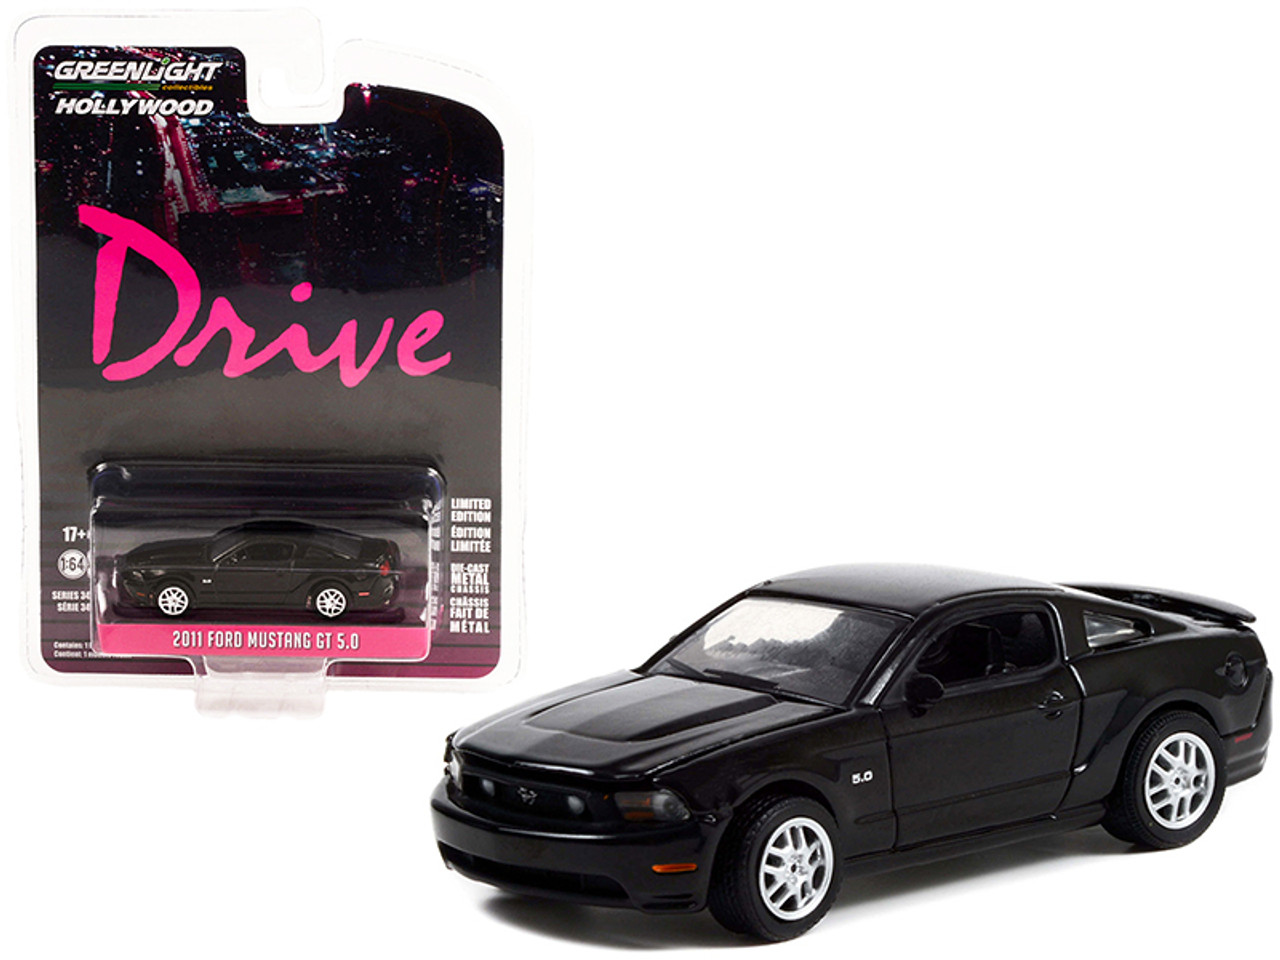 2011 Ford Mustang GT 5.0 Black "Drive" (2011) Movie "Hollywood Series" Release 34 1/64 Diecast Model Car by Greenlight